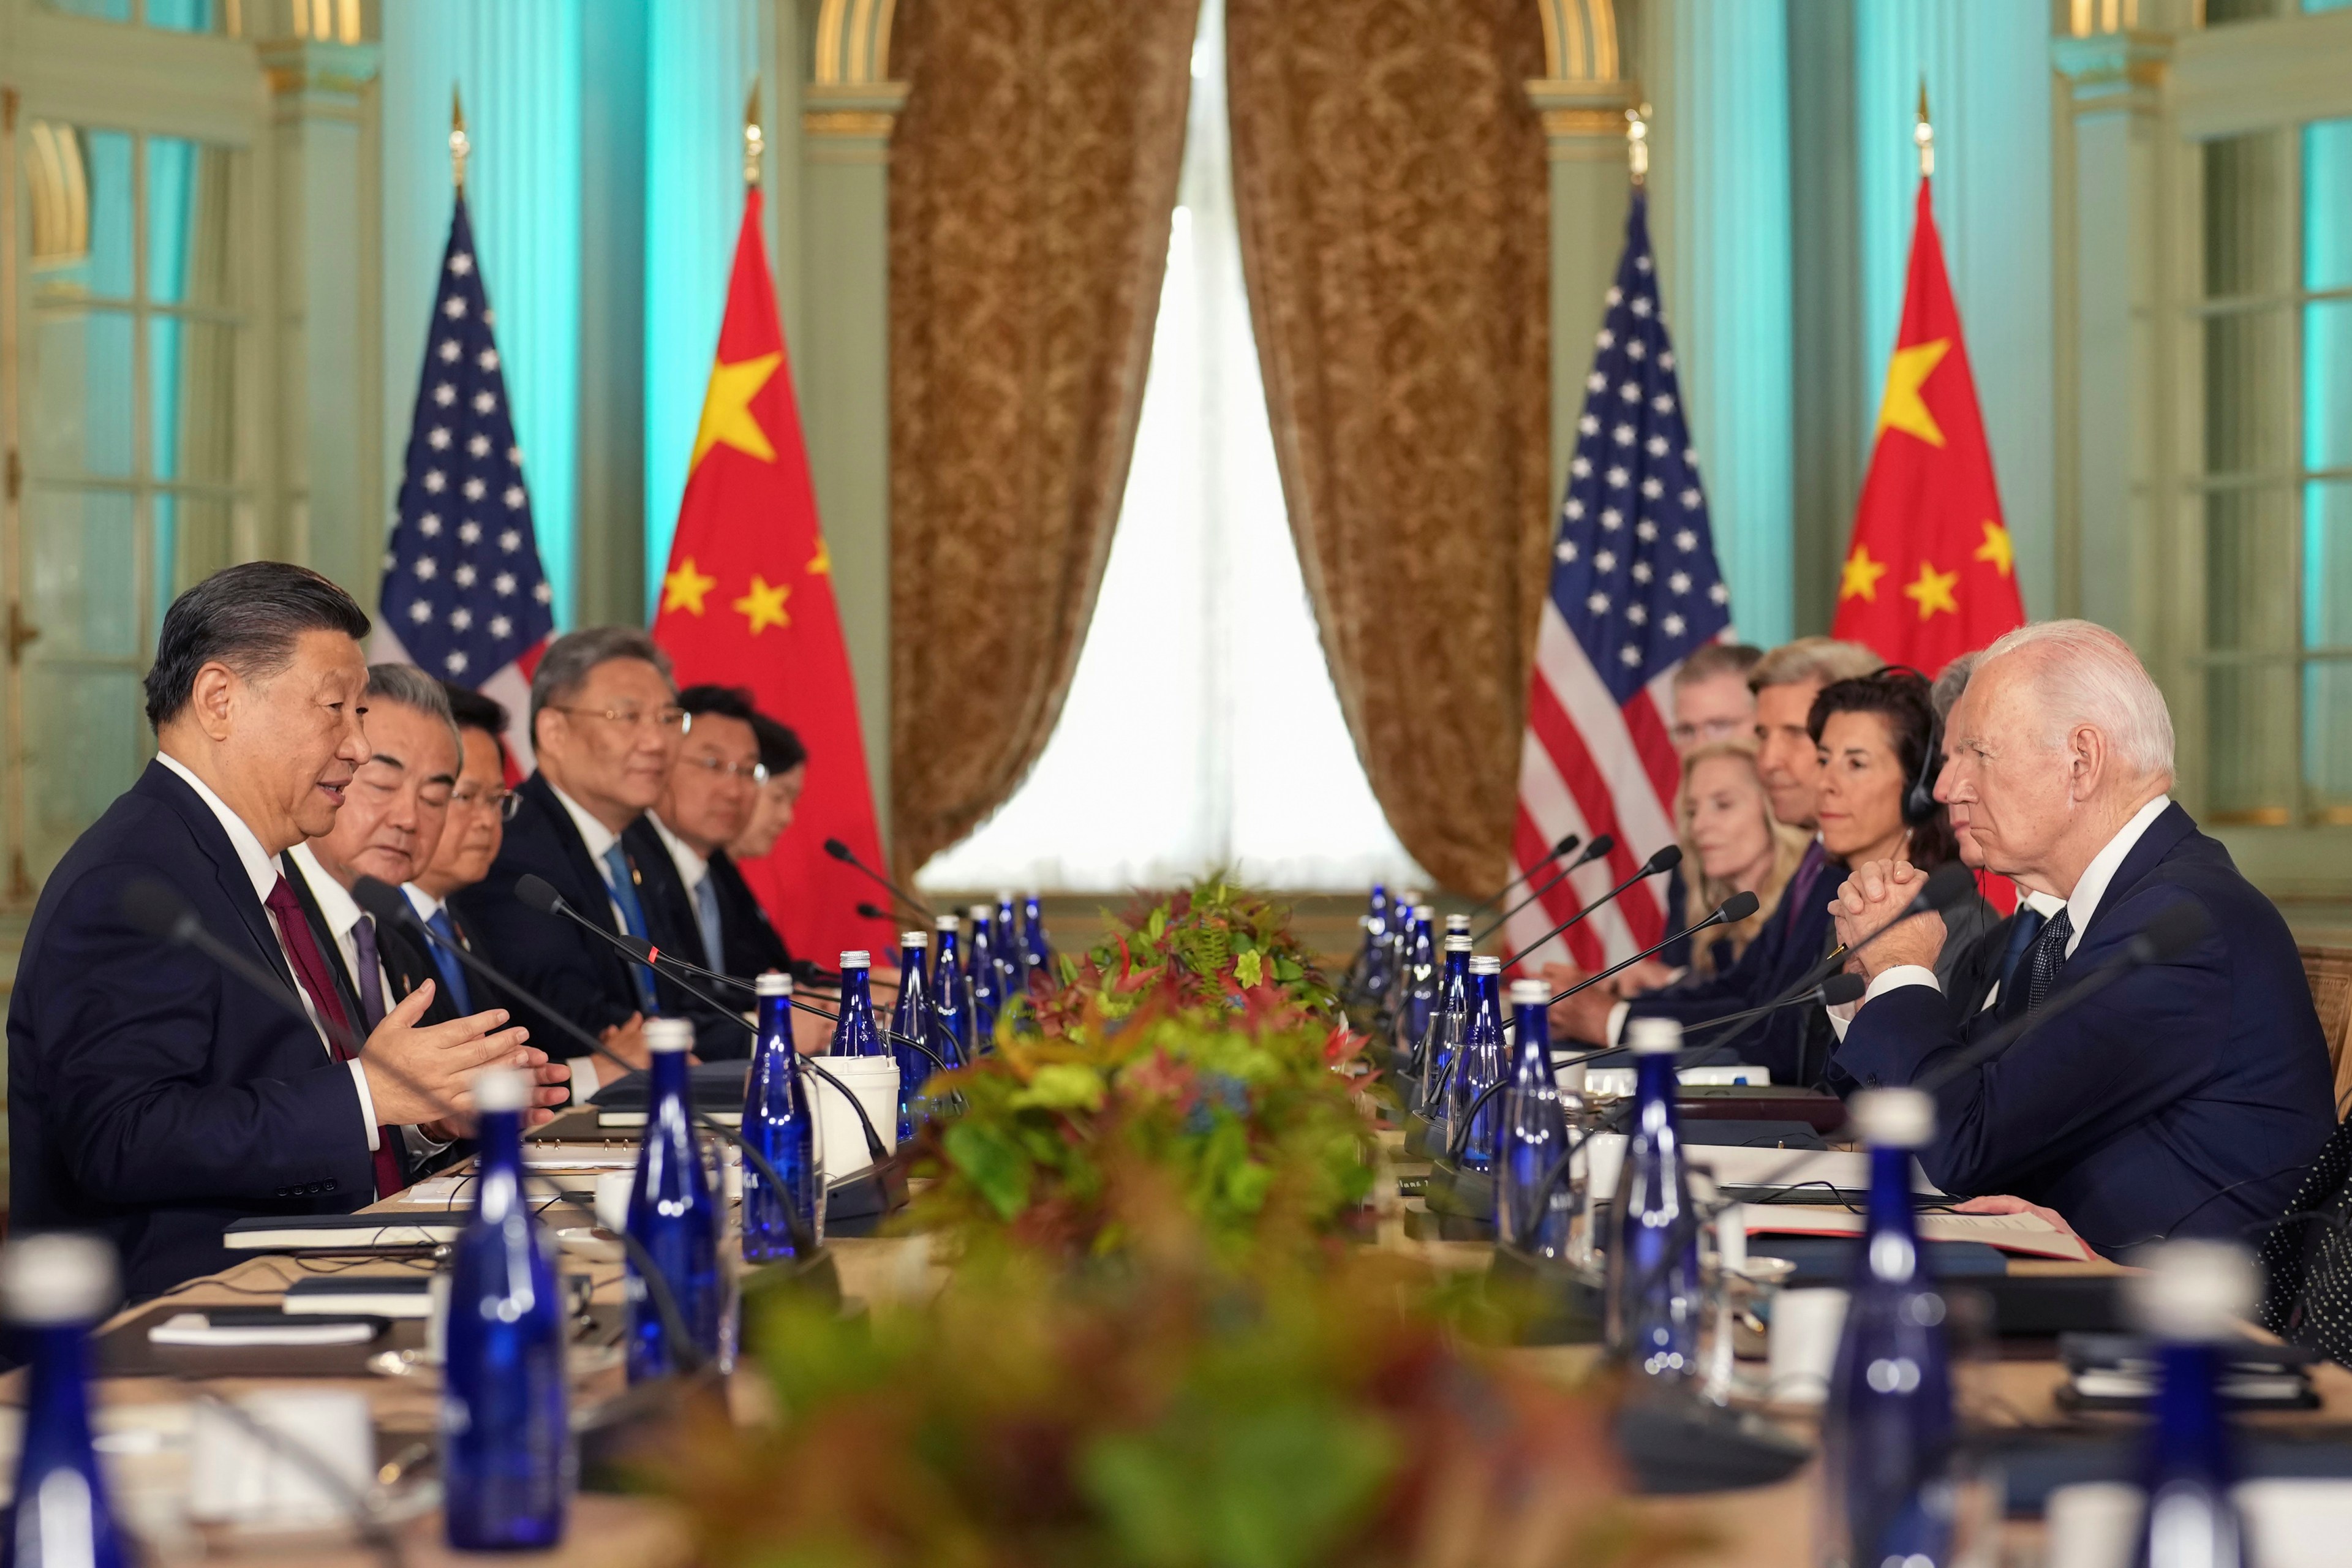 President Joe Biden listens as China's President President Xi Jinping speaks while seated at a long table with other delegates listening as well. Two Chinese and two American flags are at the back of the room in a formal dining room setting.